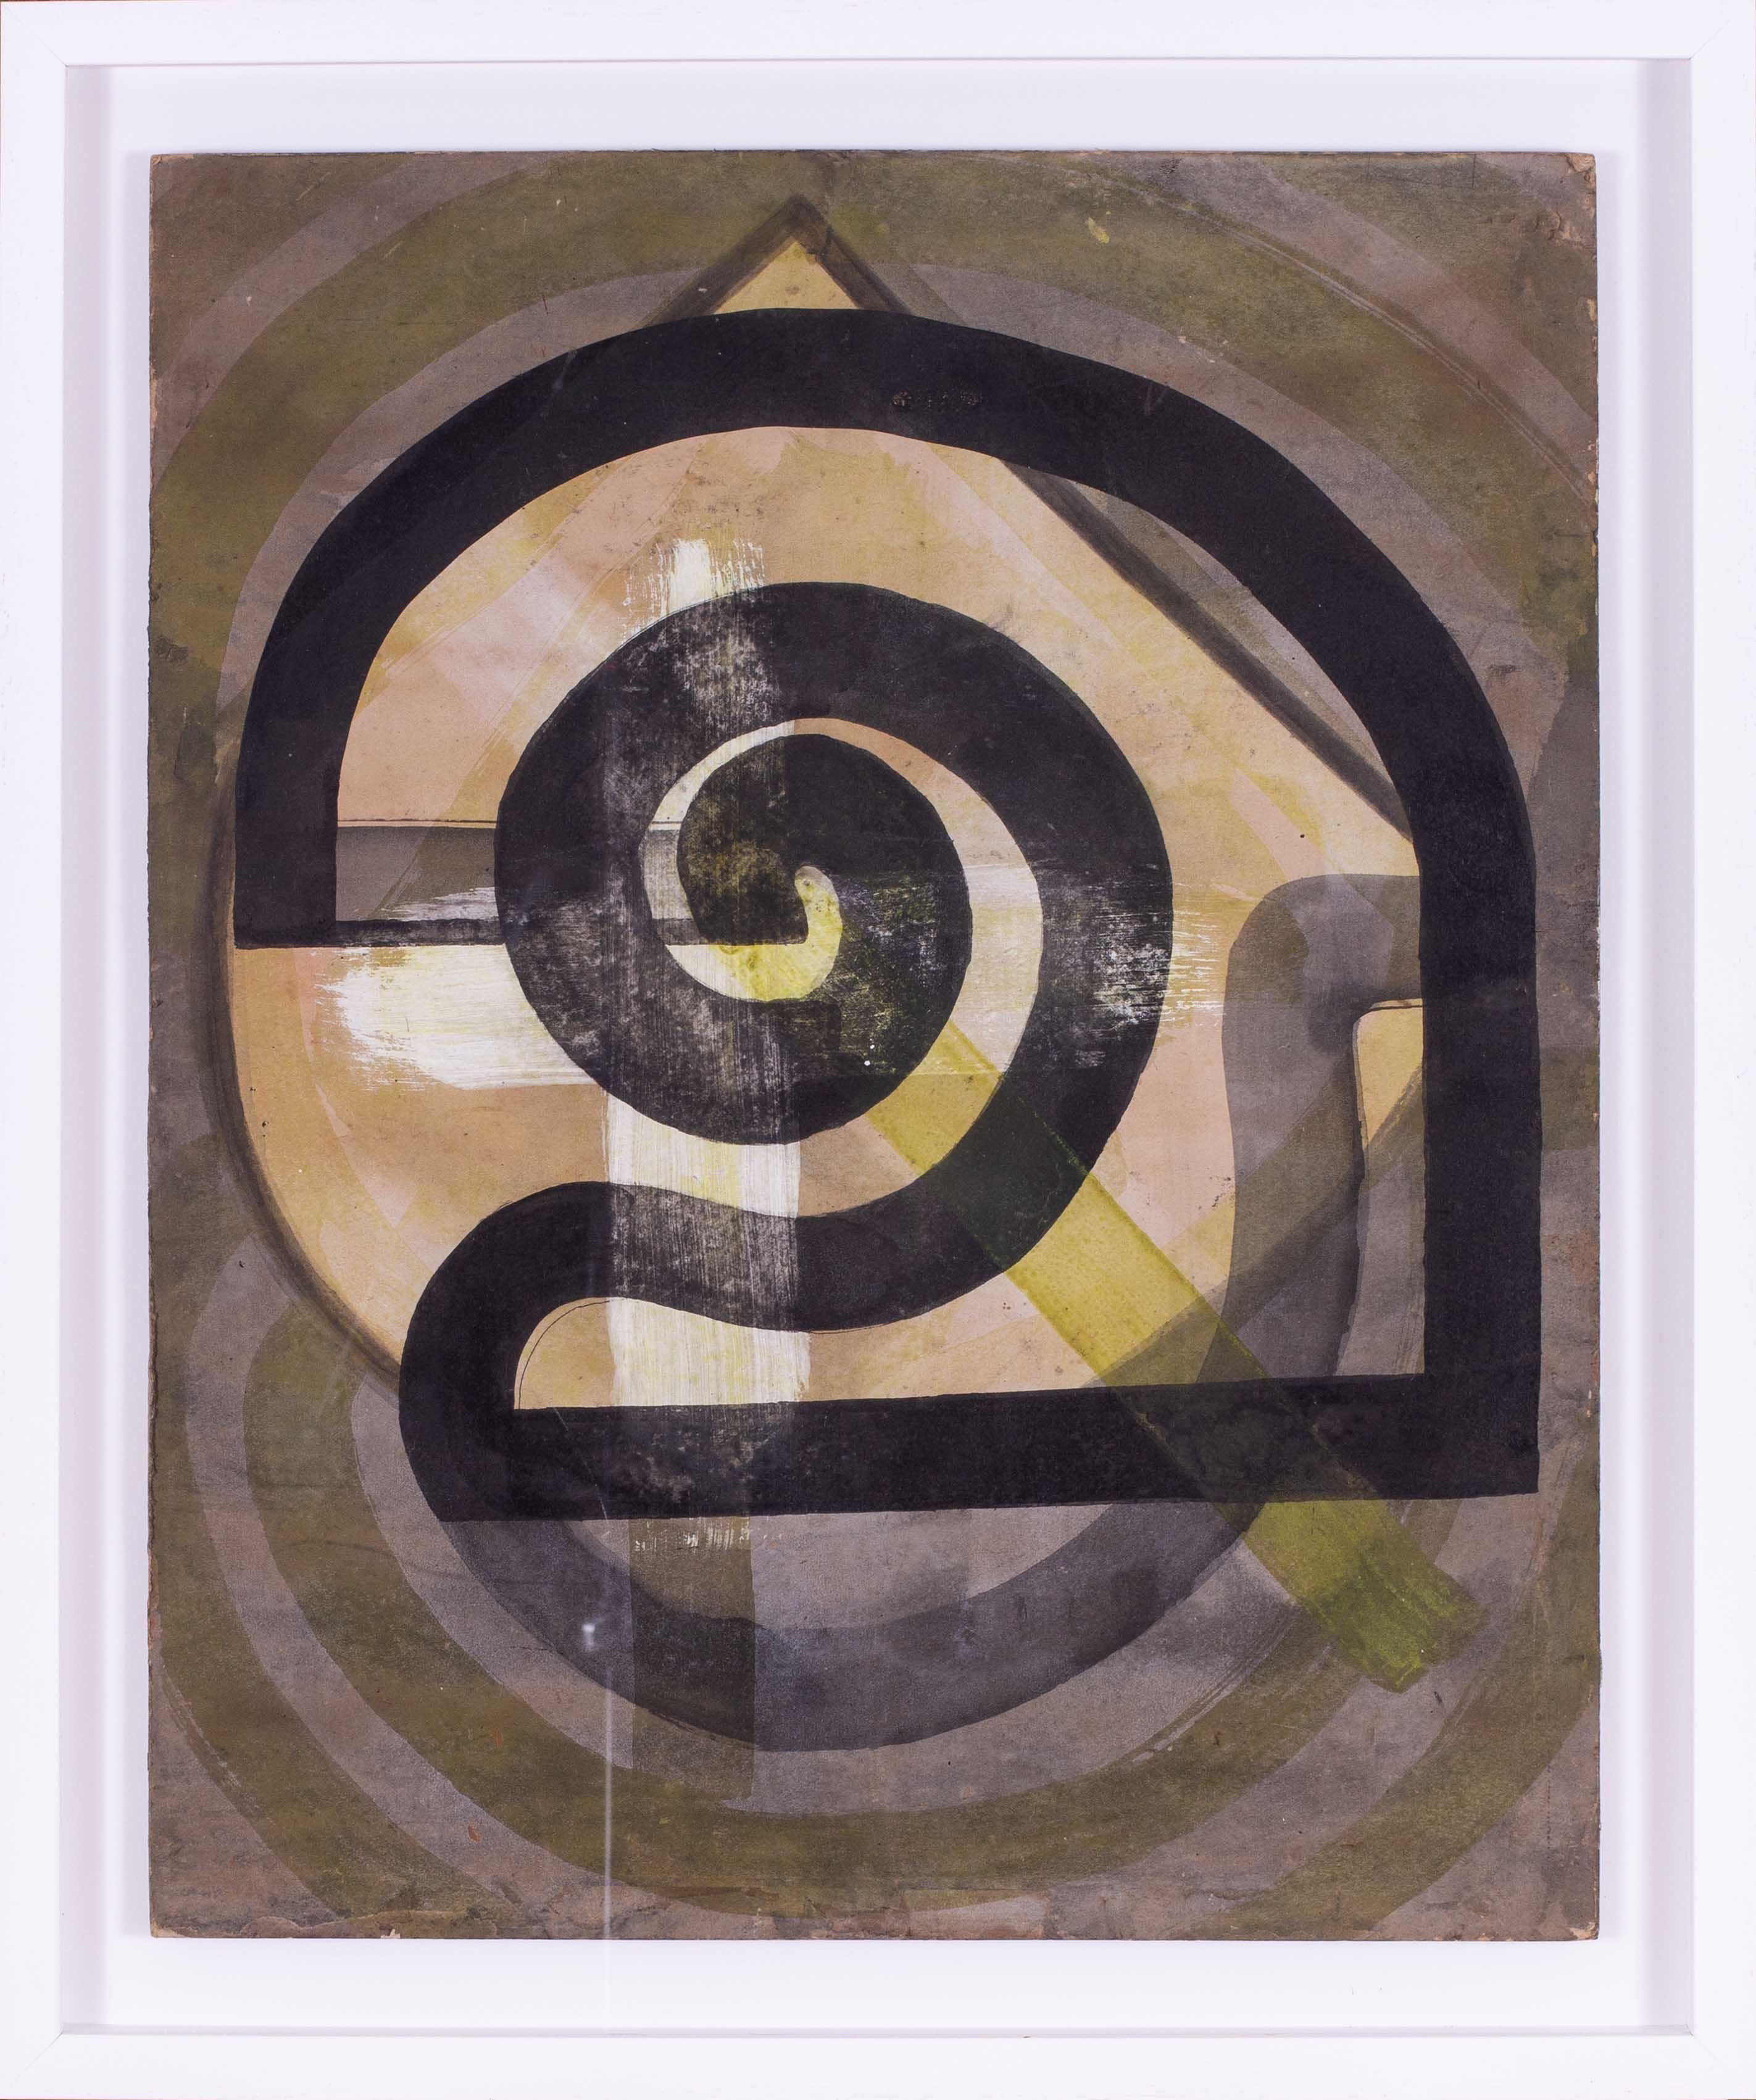 Edmond Xavier Kapp (British, 1890 – 1978)
Spiral 2
Mixed media
21.1/2 x 17.1/4 in. (54.7 x 43.8 cm.)

Edmond Kapp was born in Islington, London, on 5 November 1890, of American and German Jewish parentage. He gave himself the middle initial ‘X’ –